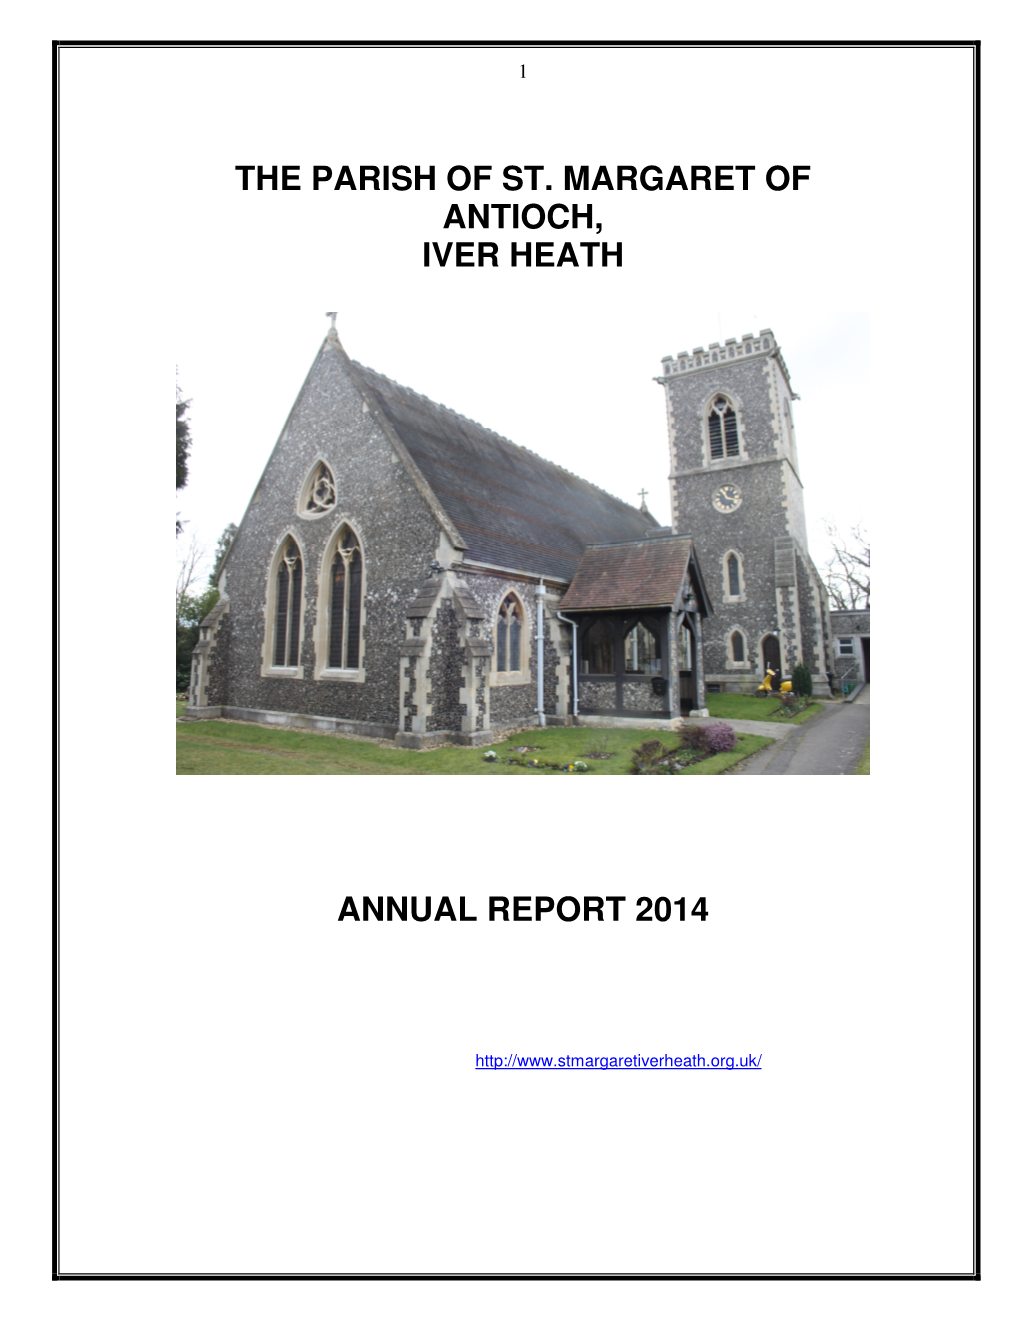 The Parish of St. Margaret of Antioch, Iver Heath Annual